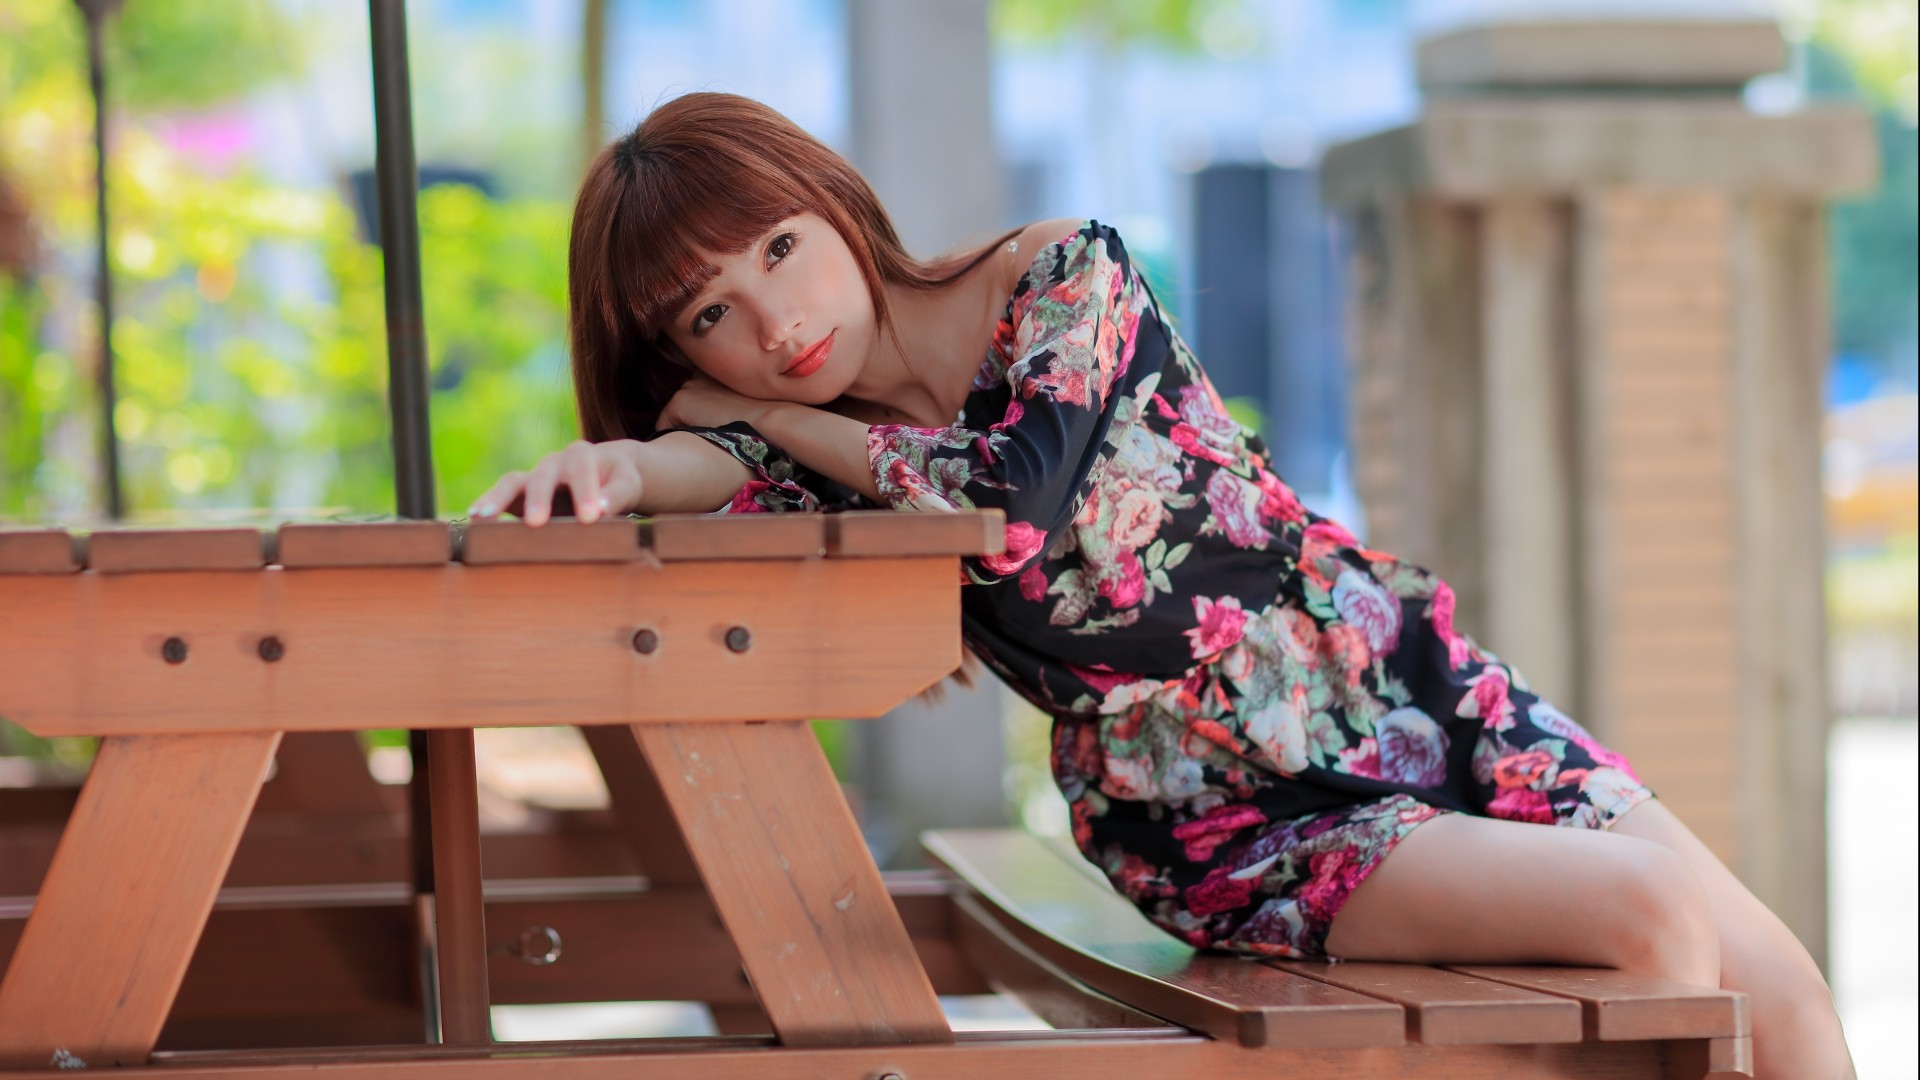 People 1920x1080 women model brunette long hair women outdoors Asian looking at viewer brown eyes flowers minidress sitting wood bench table red lipstick